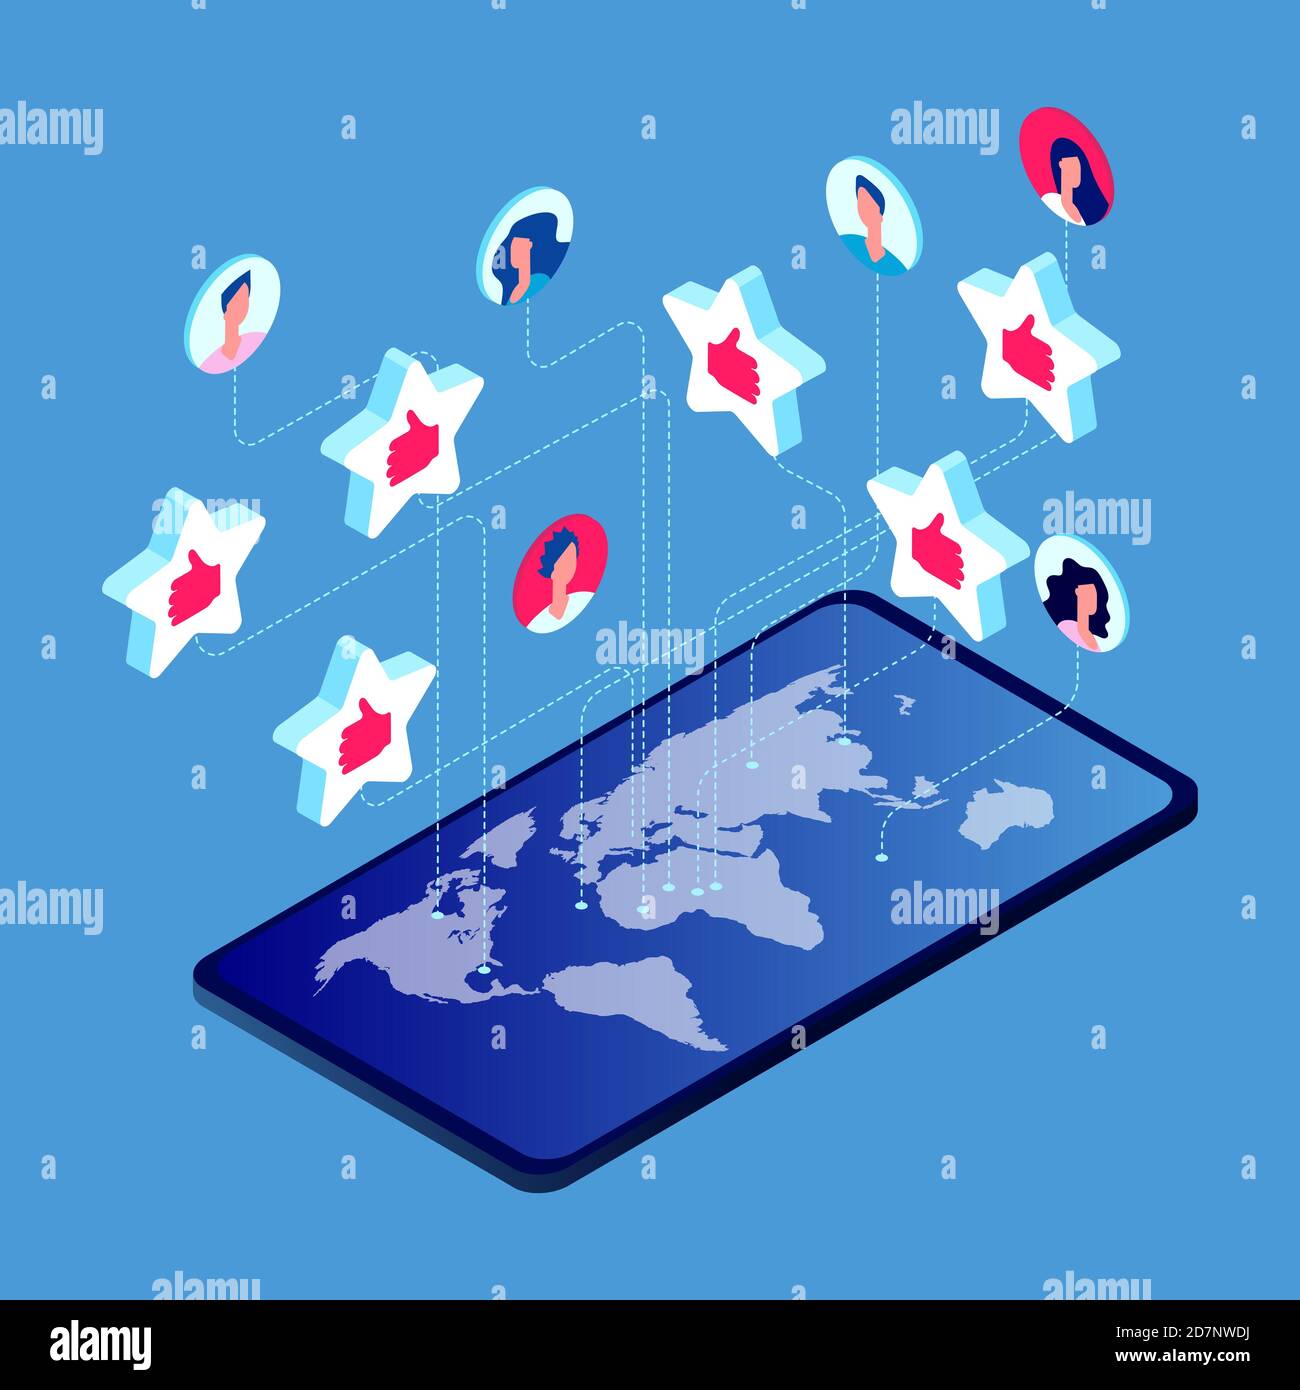 People like it around the world vector concept. Illustration of social media communication Stock Vector